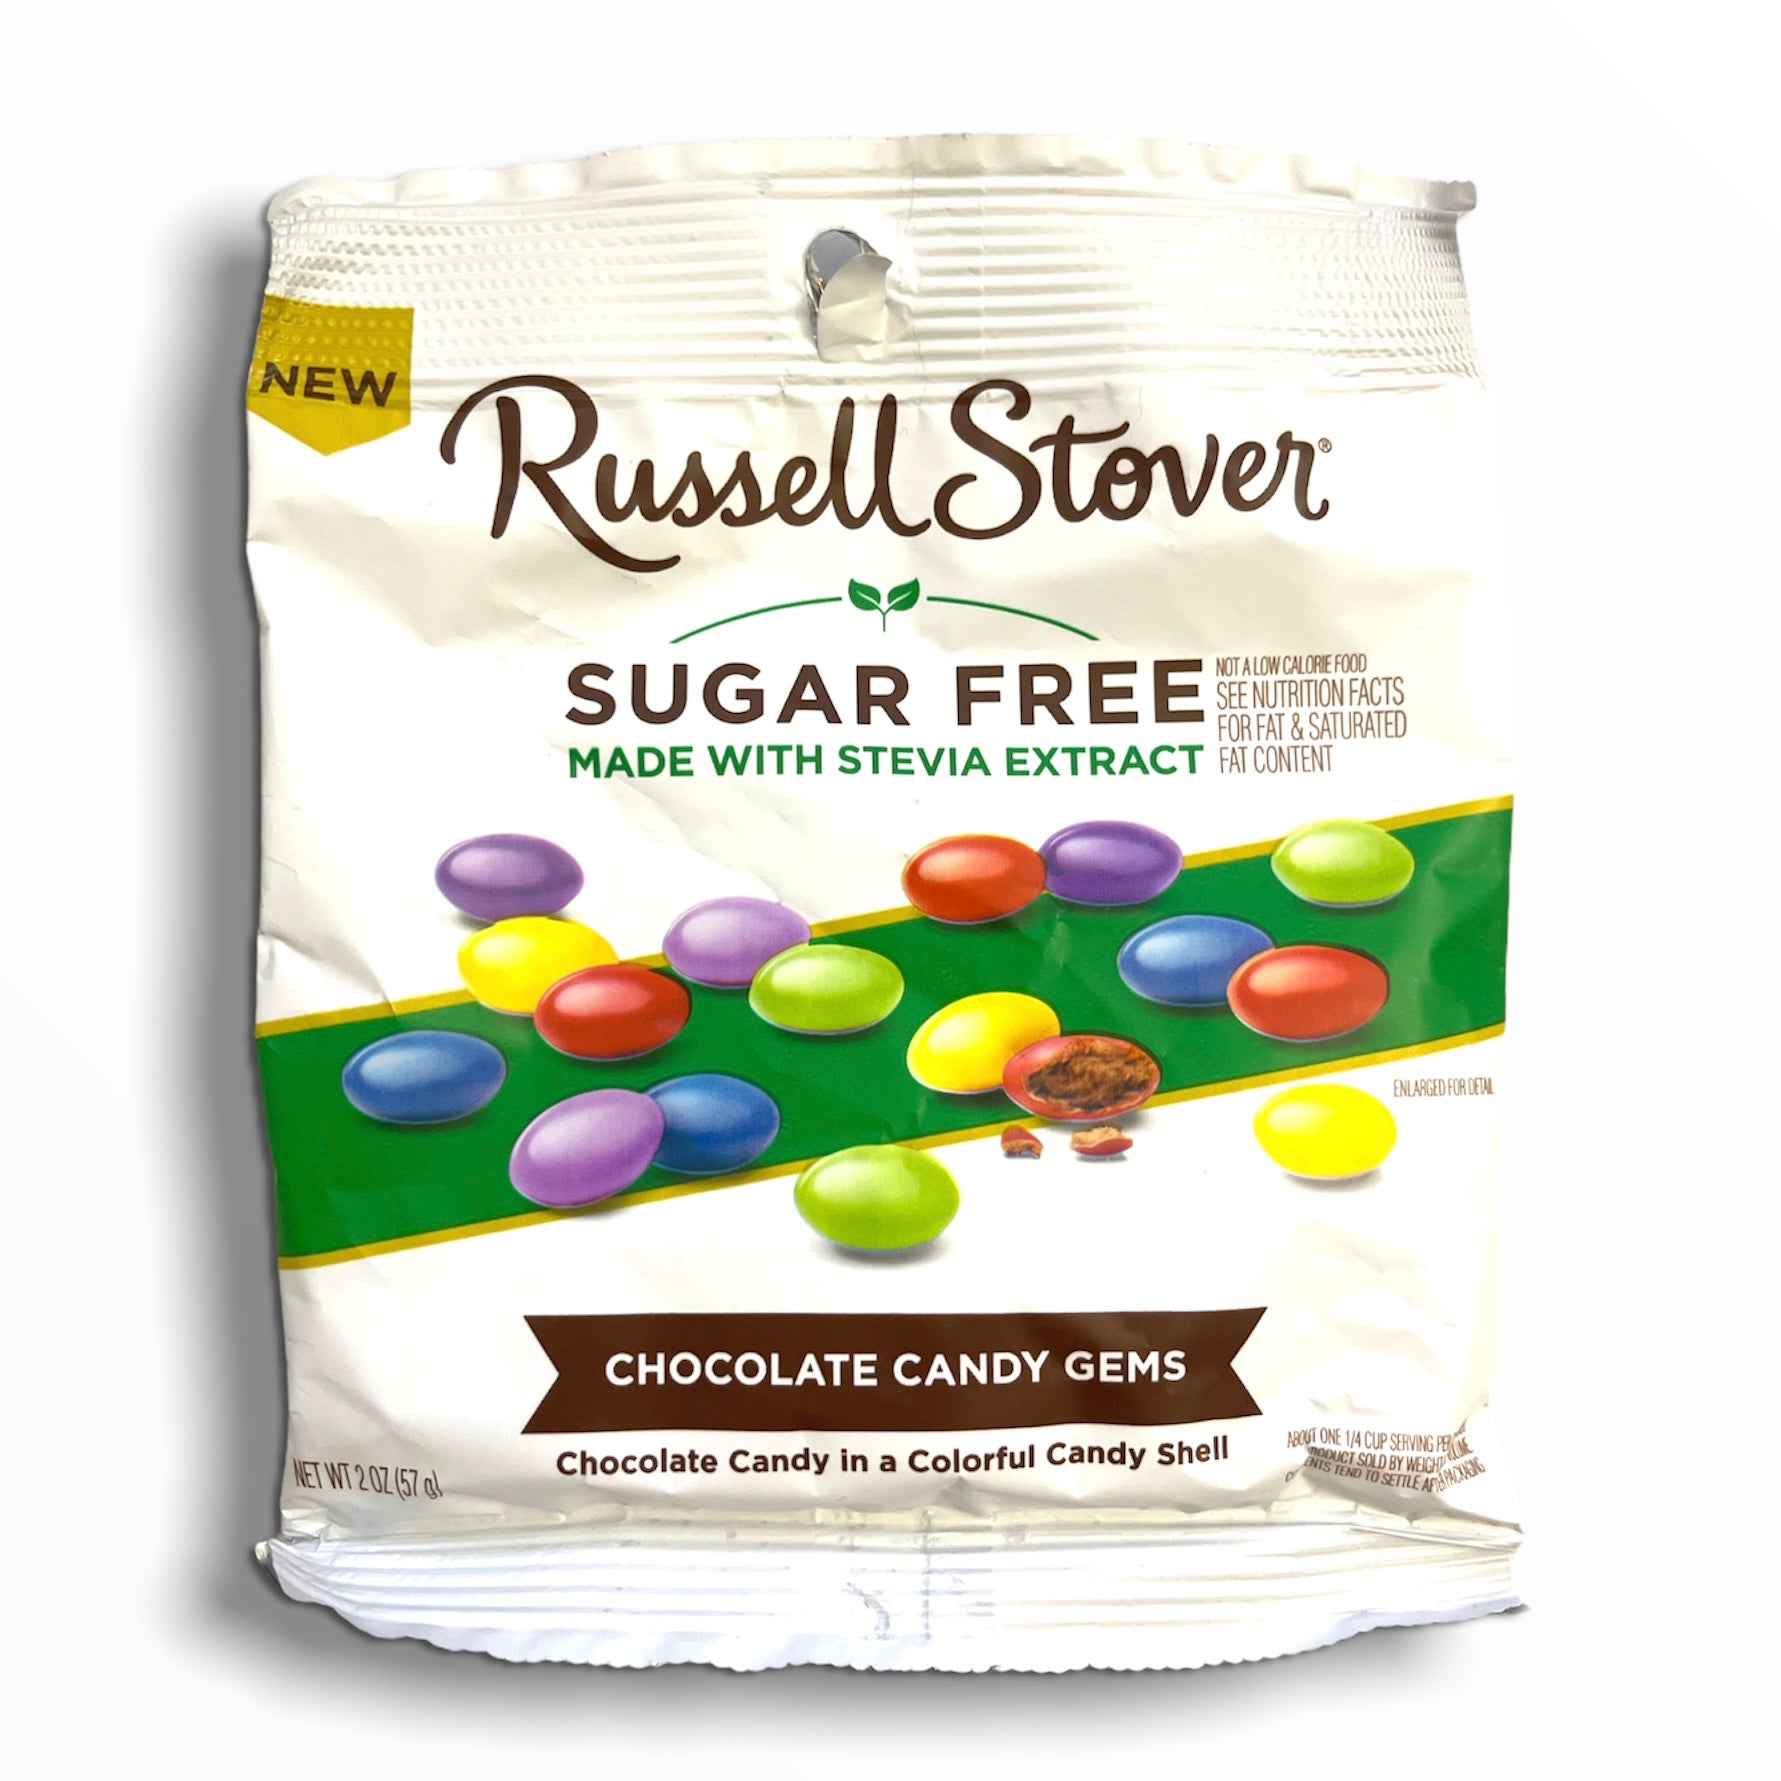 Russell Stover Sugar Free Chocolate Candy Gems, 2oz